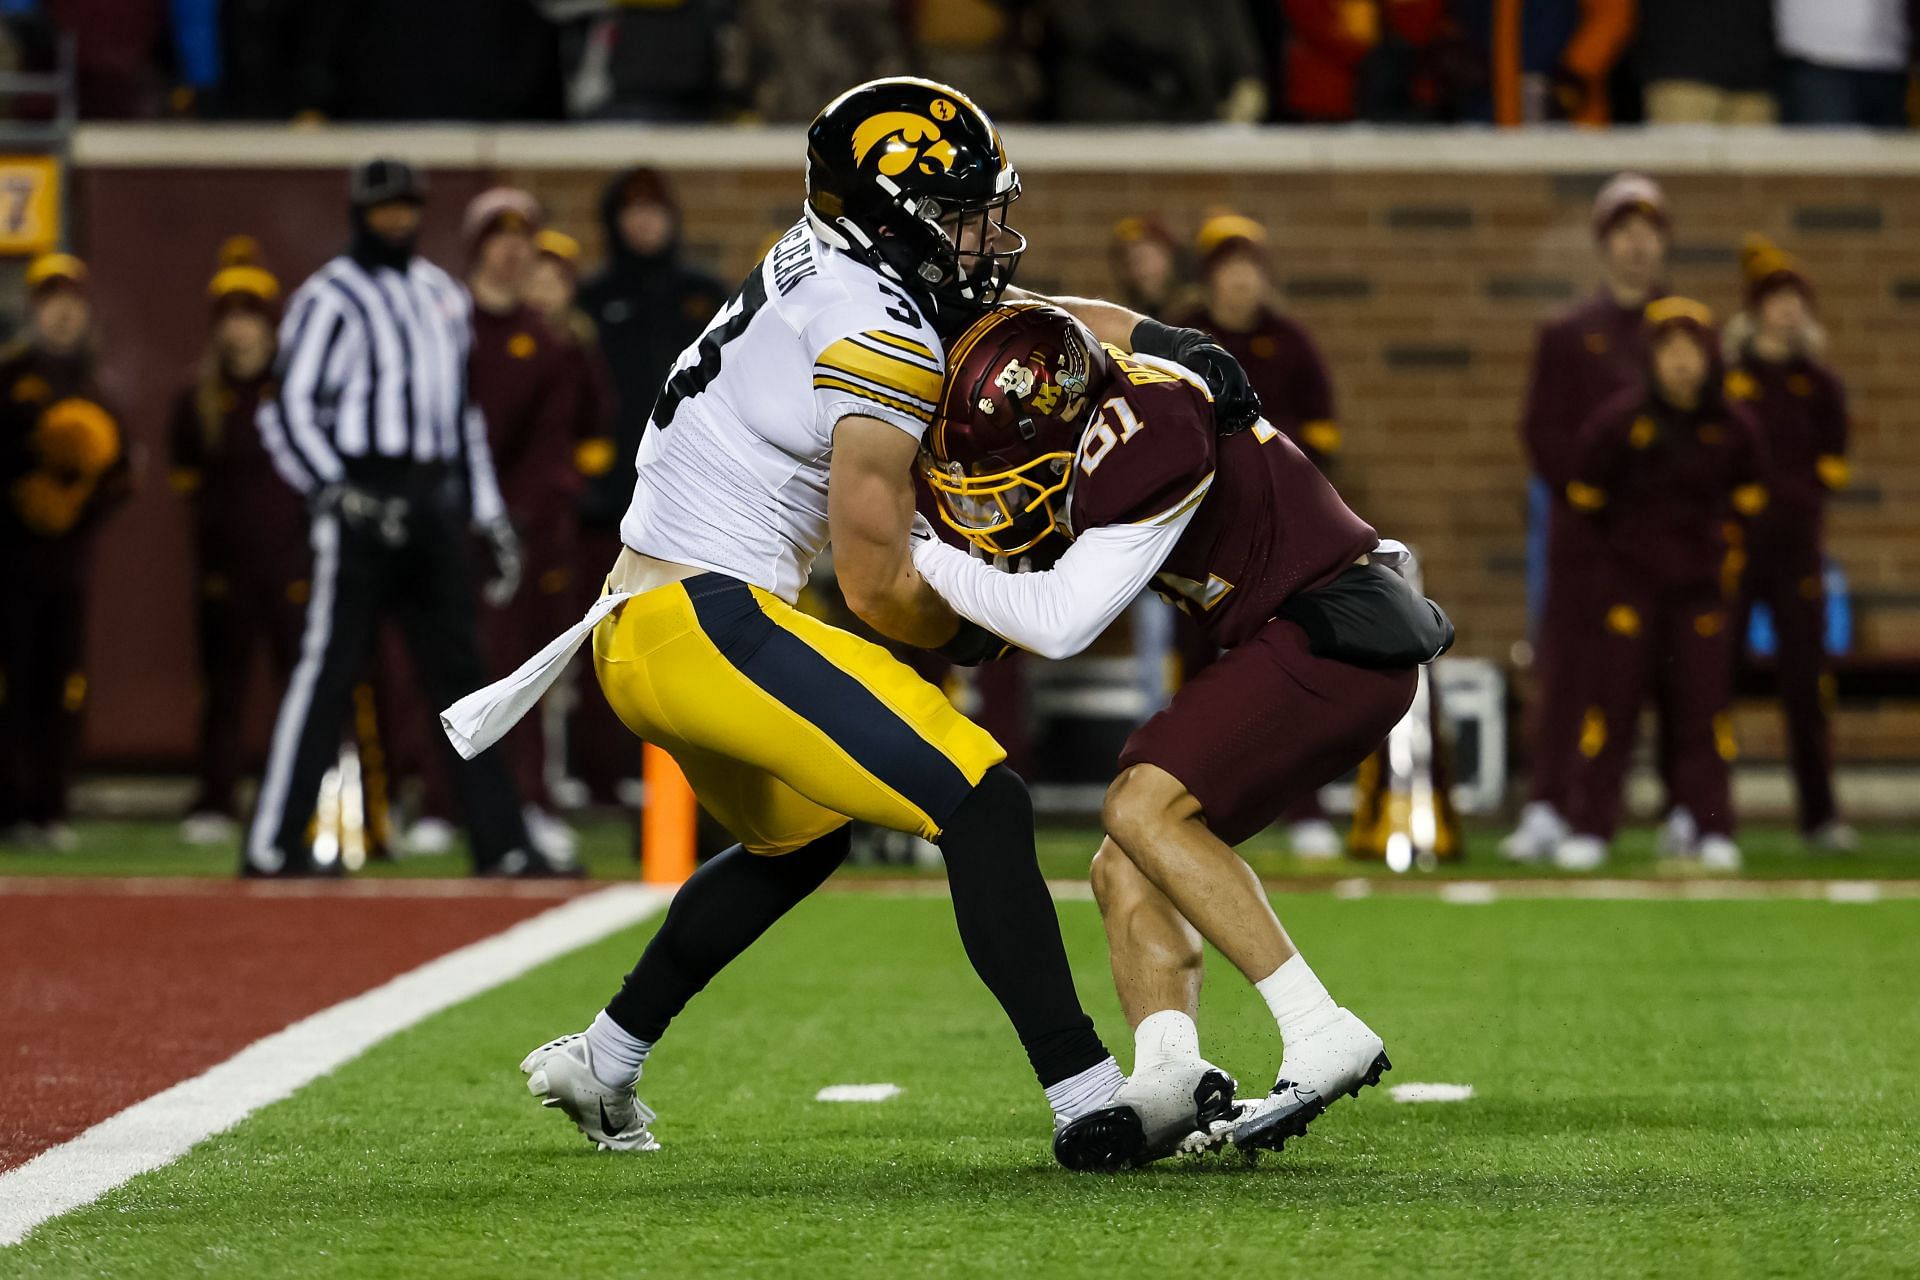 Cooper DeJean #3 of the Iowa Hawkeyes tackles Quentin Redding #81 of the Minnesota Golden Gophers